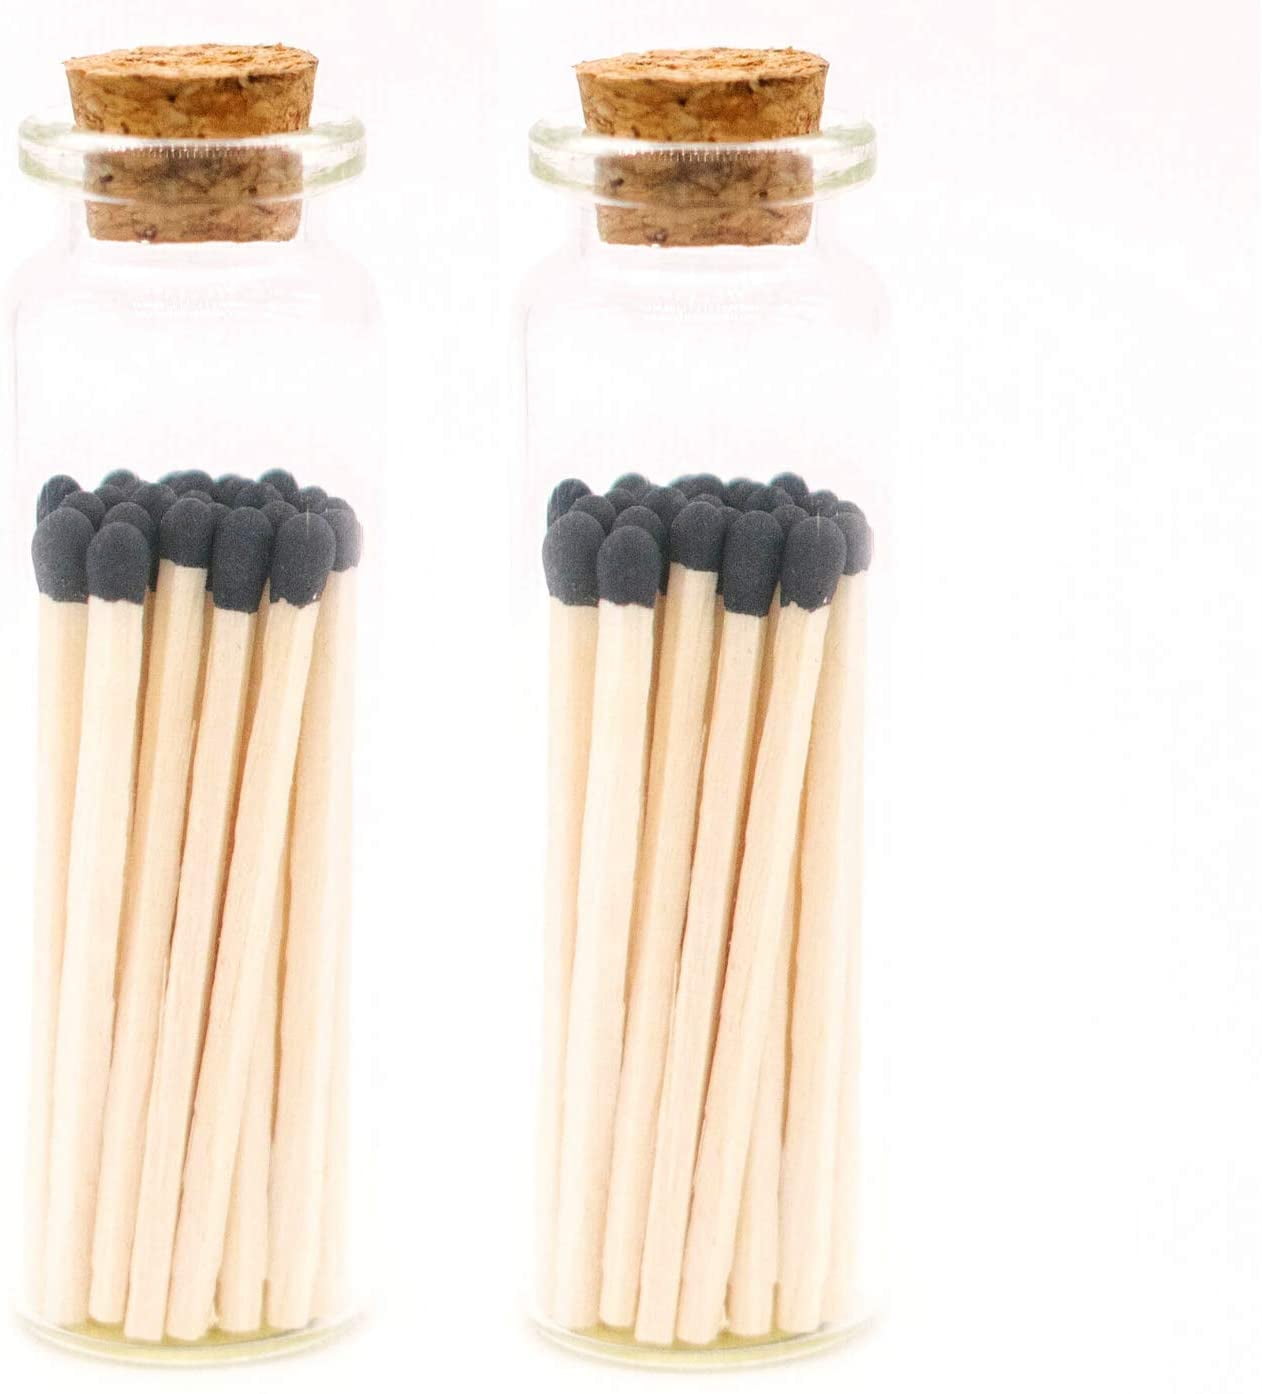  Made Market Co. Safety Matches Refills, Approx. 100 3.5” Wood  Colored Tip Matchsticks for Candle & Decor, Includes Striker For Placement